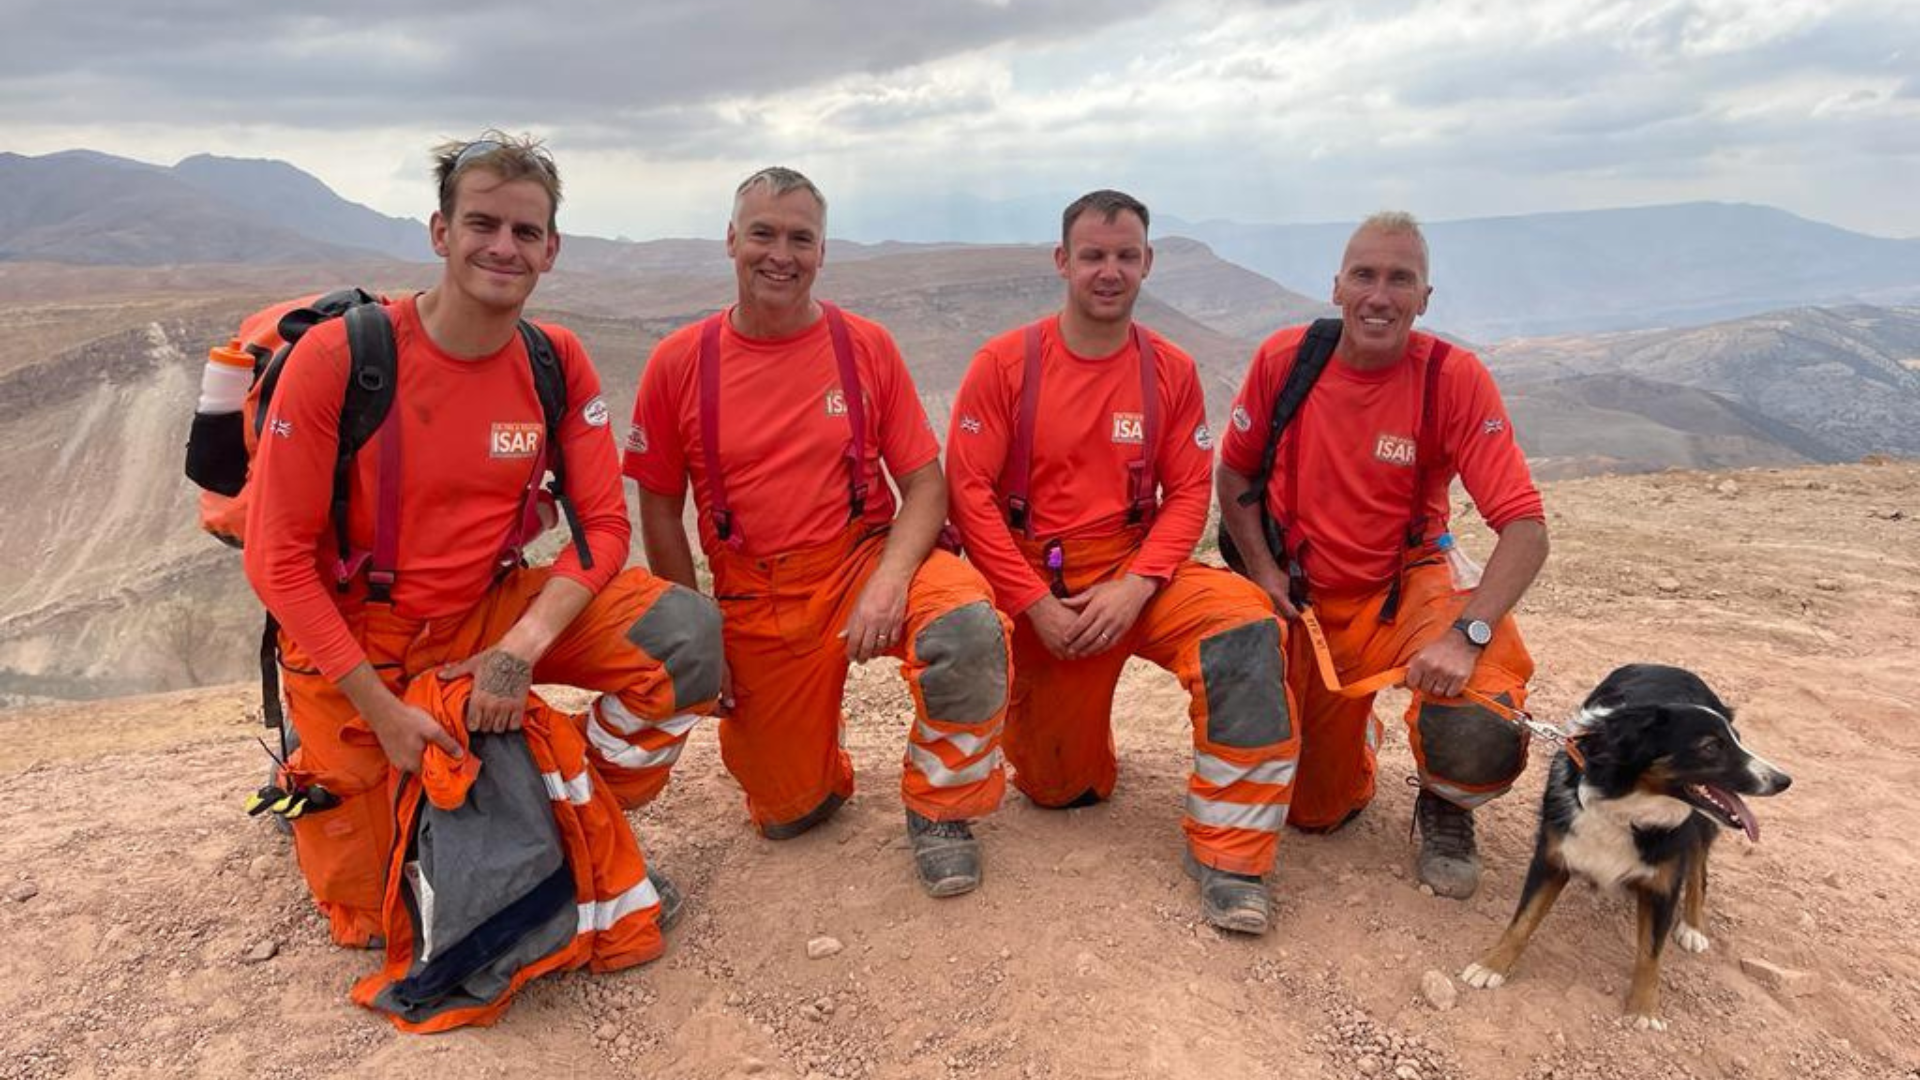 Four firefighters standing in a remote sandy landscape kneeling on one knee with a dog, smiling at the camera